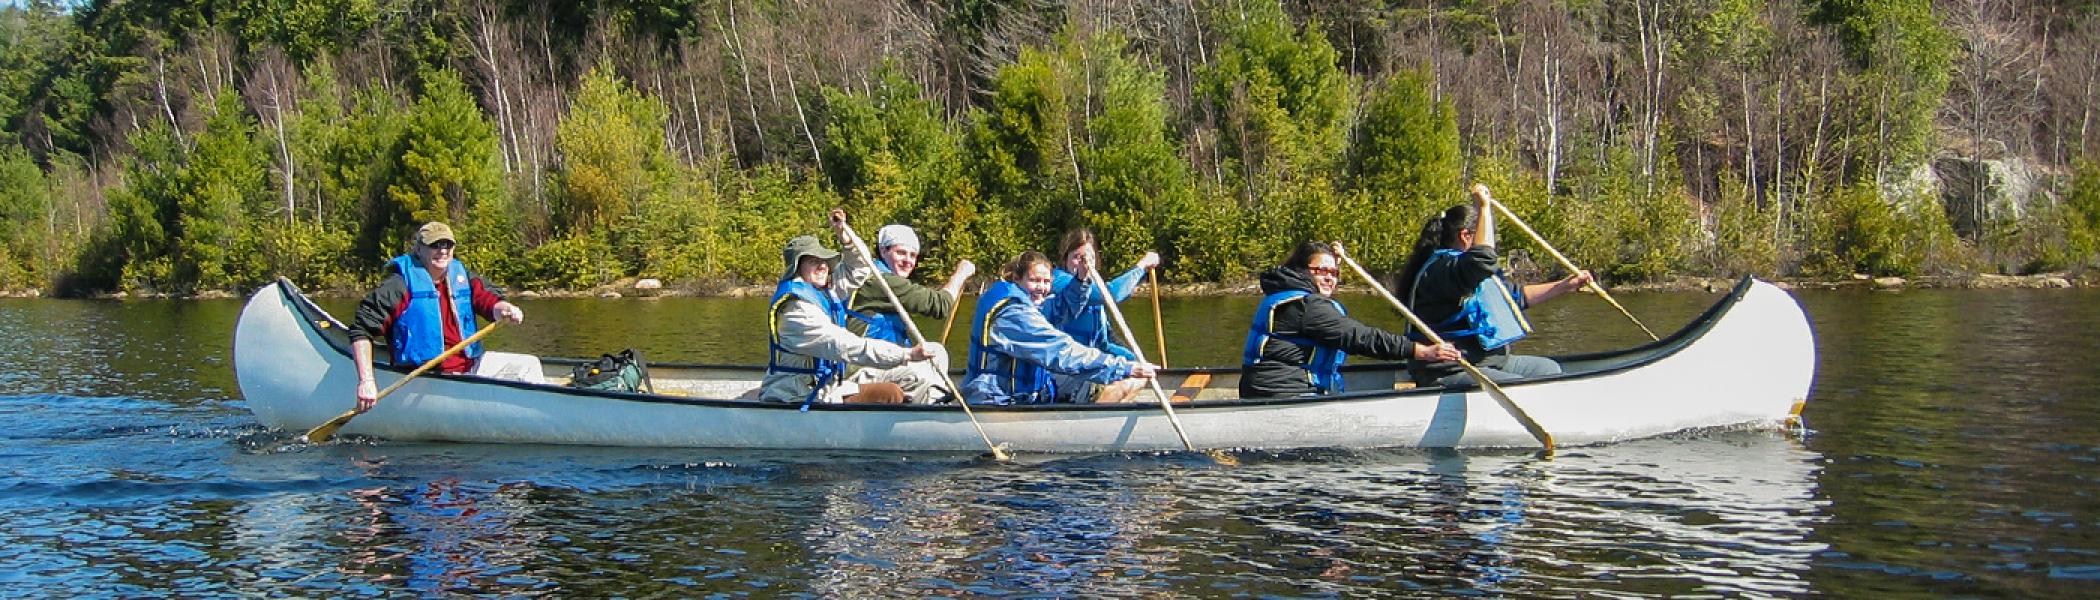 a group of people sitting in a canoe with blue life jackets on, paddling along a river in the summer sun